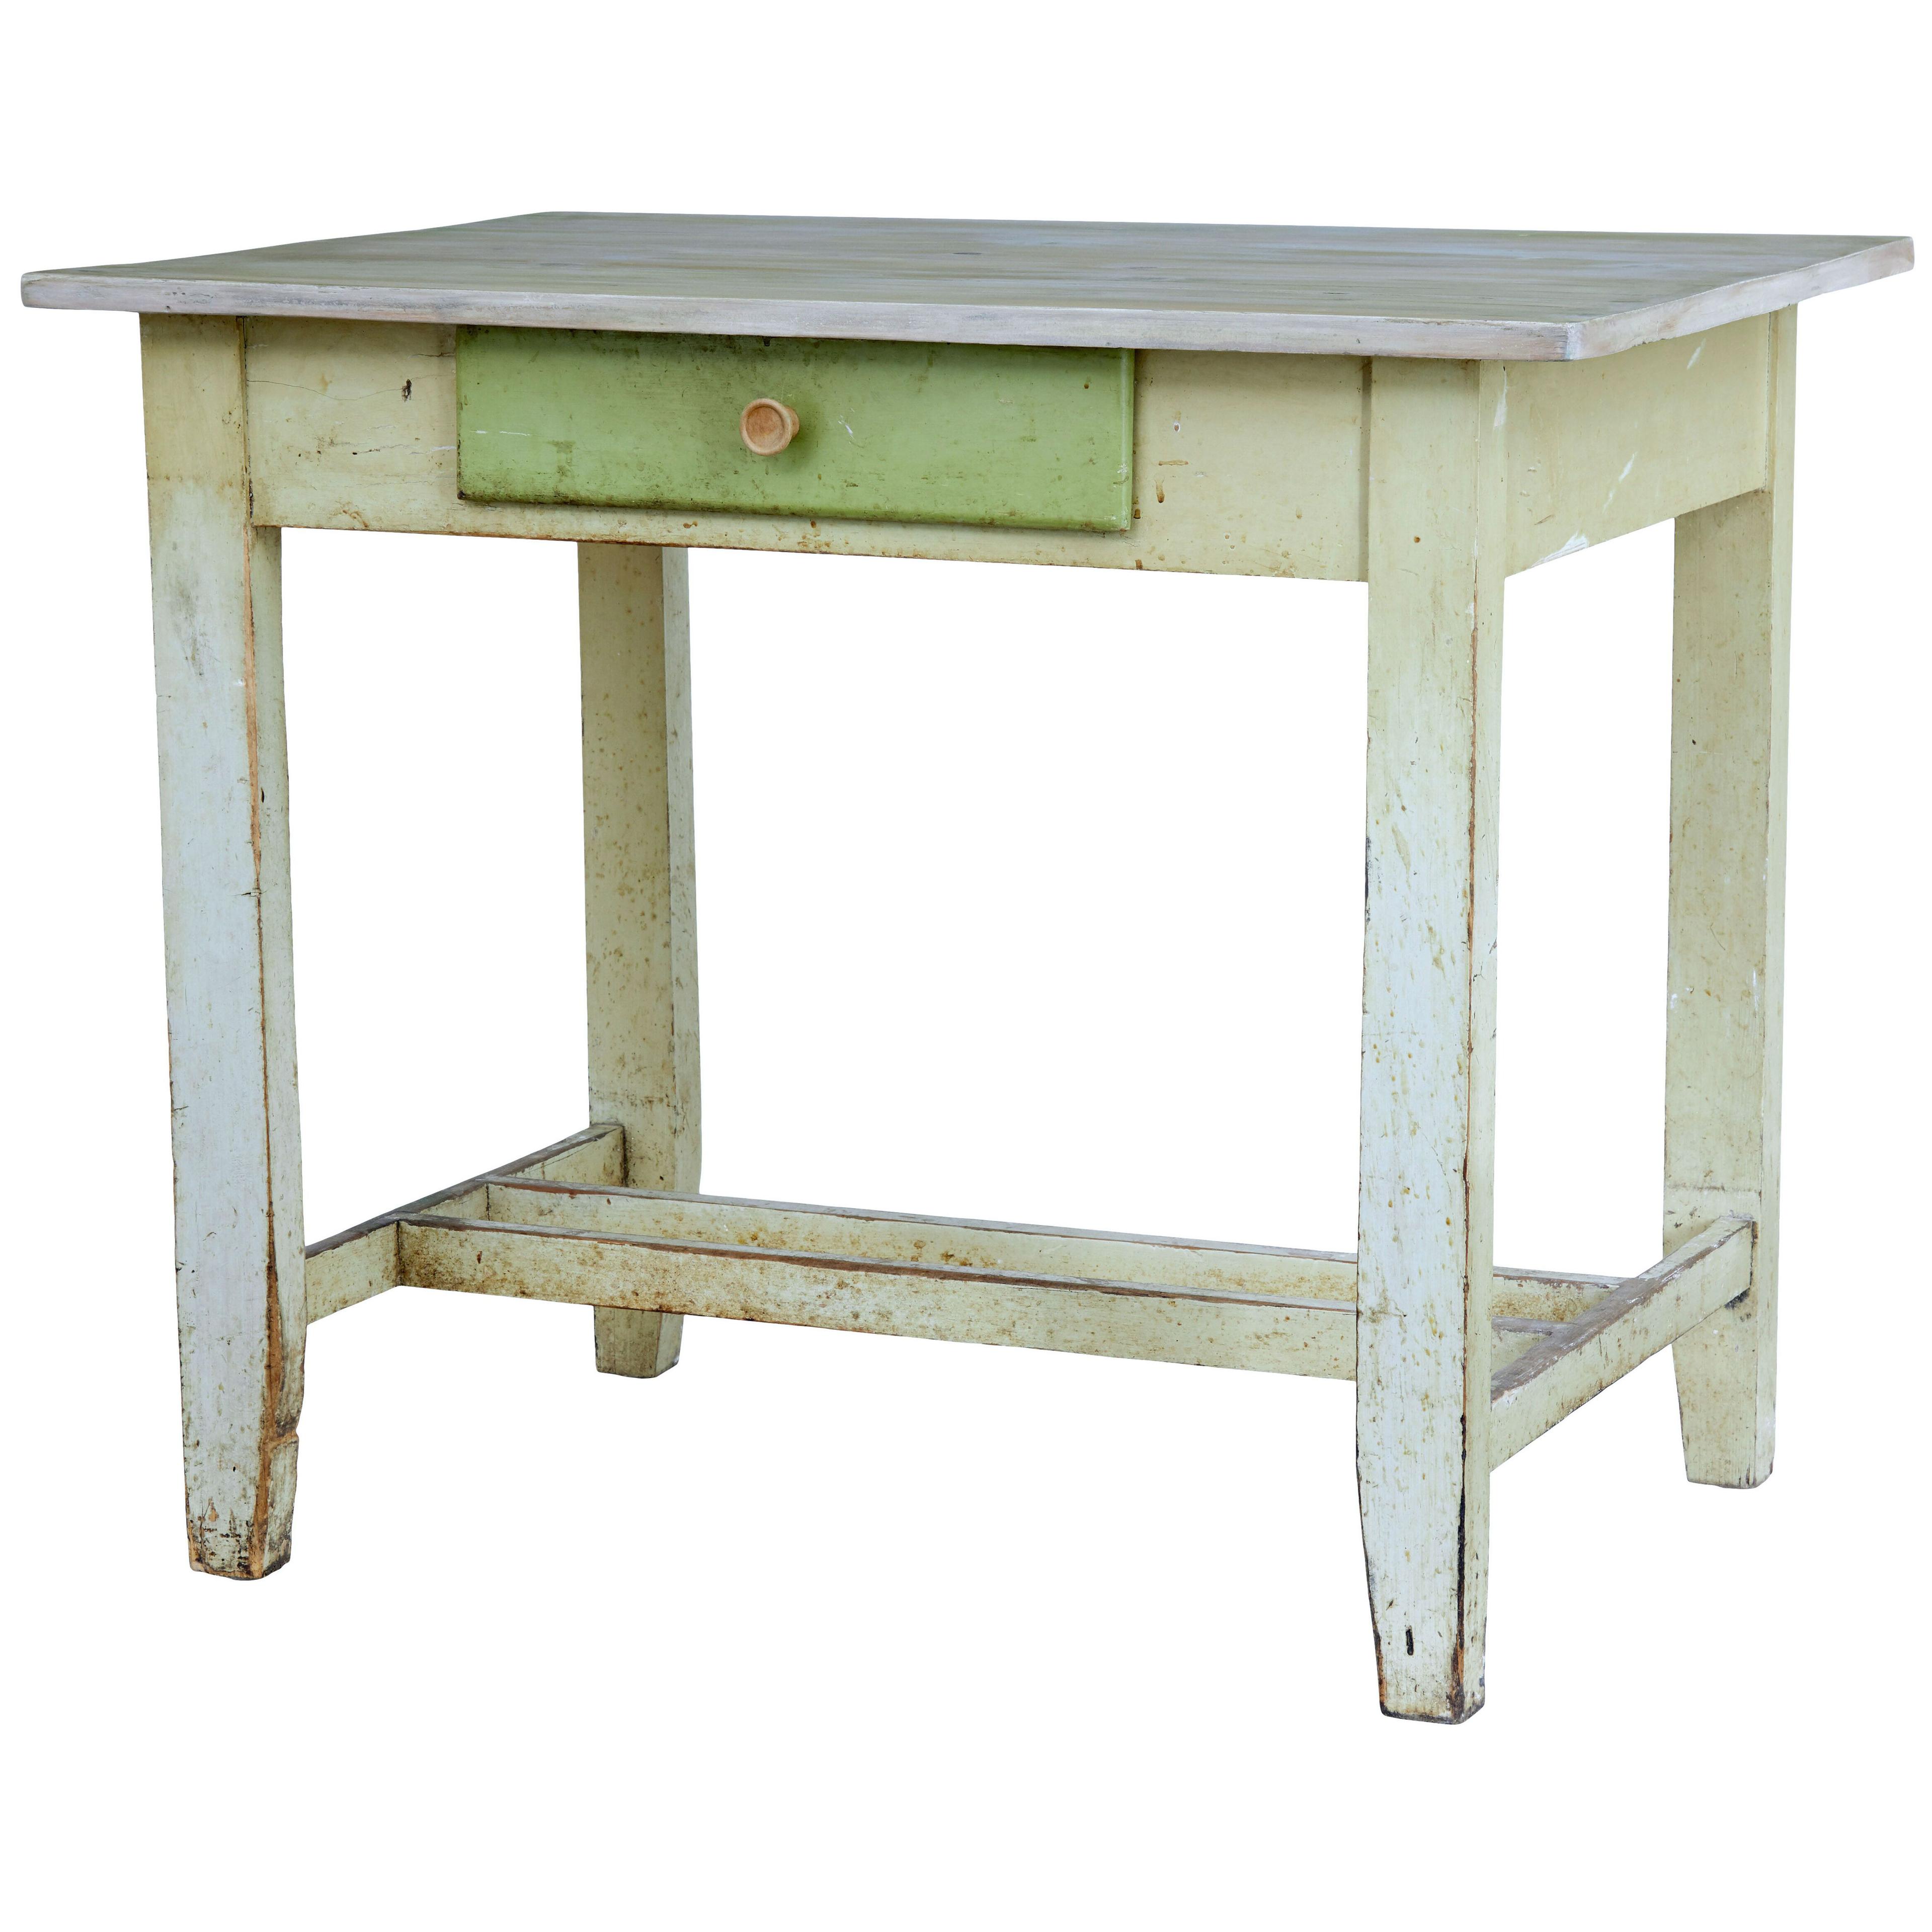 19TH CENTURY GREEN PAINTED SCANDINAVIAN SIDE TABLE